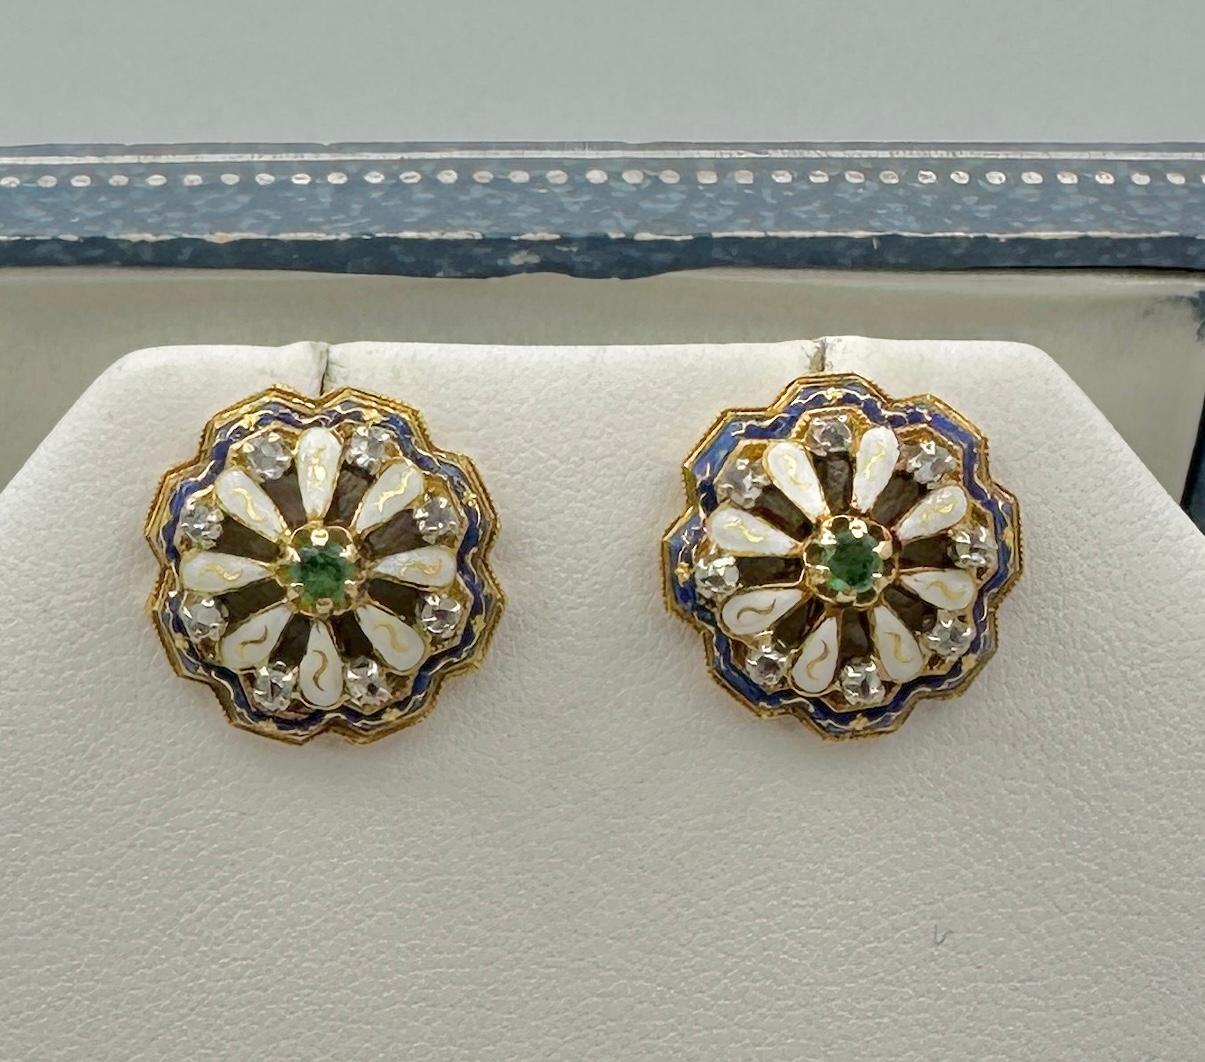 Victorian Earrings Emerald 16 Old Mine Cut Diamonds Blue Enamel 14 Karat Gold In Excellent Condition For Sale In New York, NY